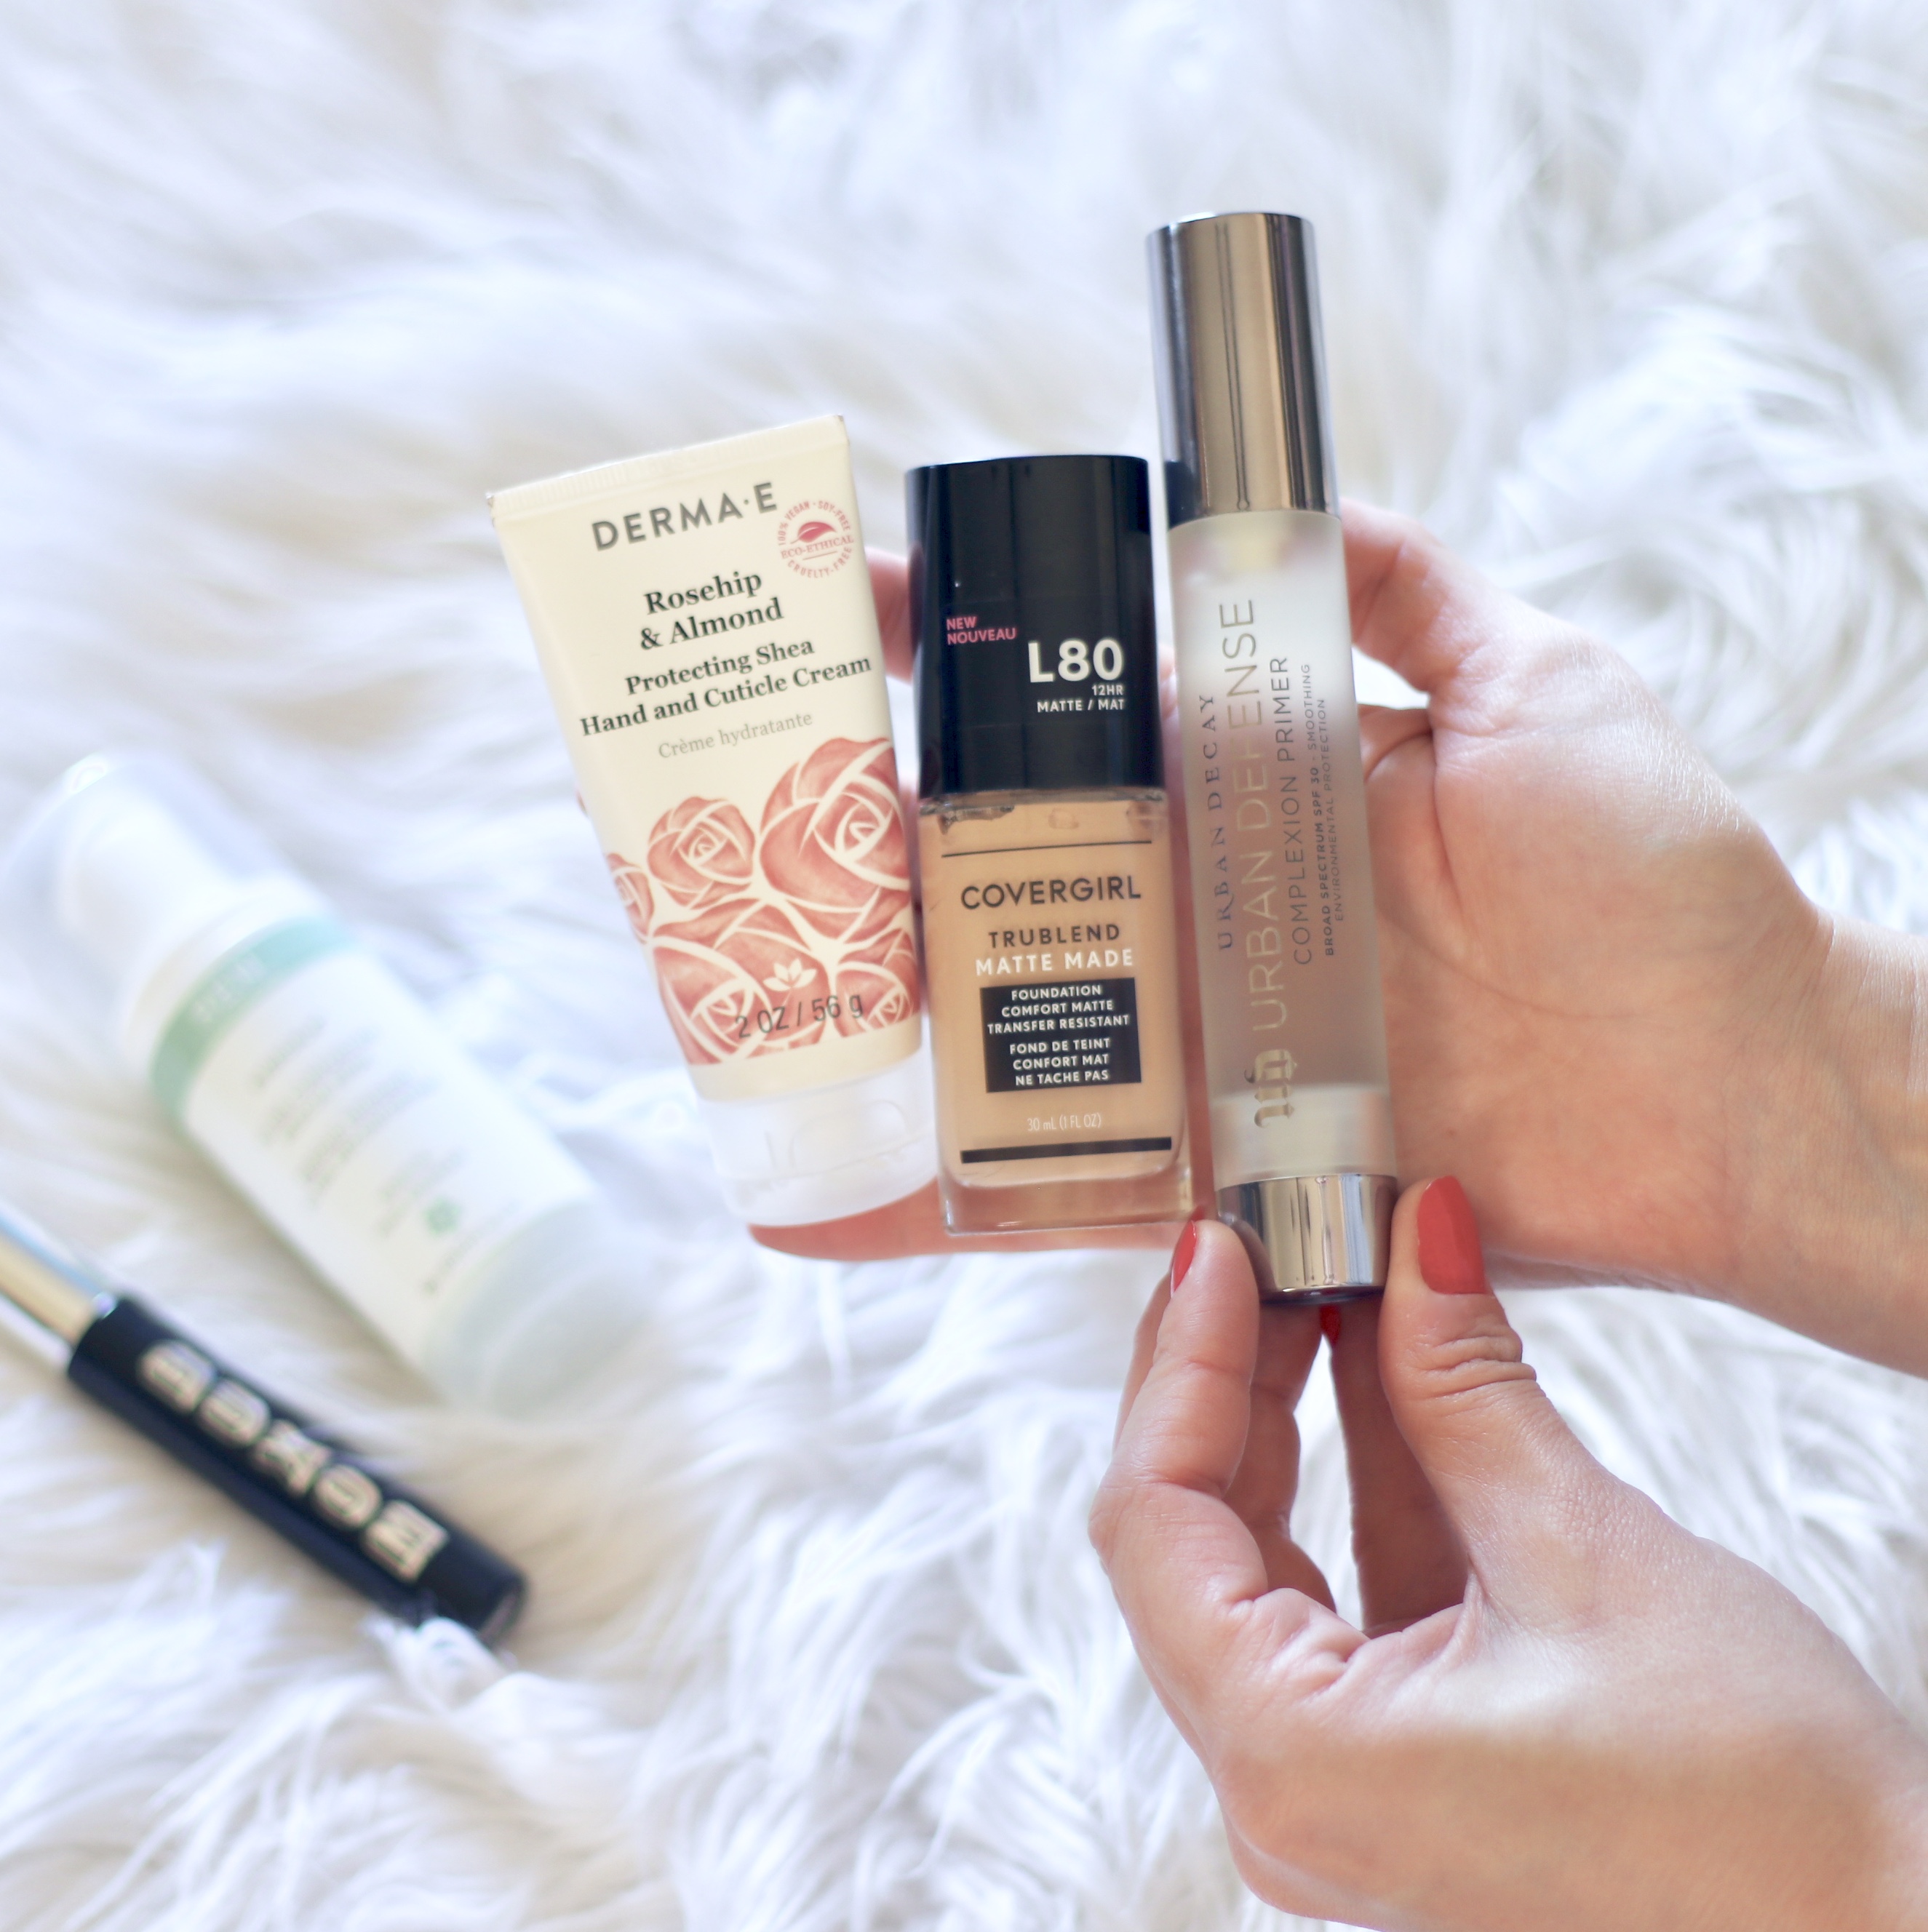 July beauty hits and misses #beautyproducts #skincare #makeup